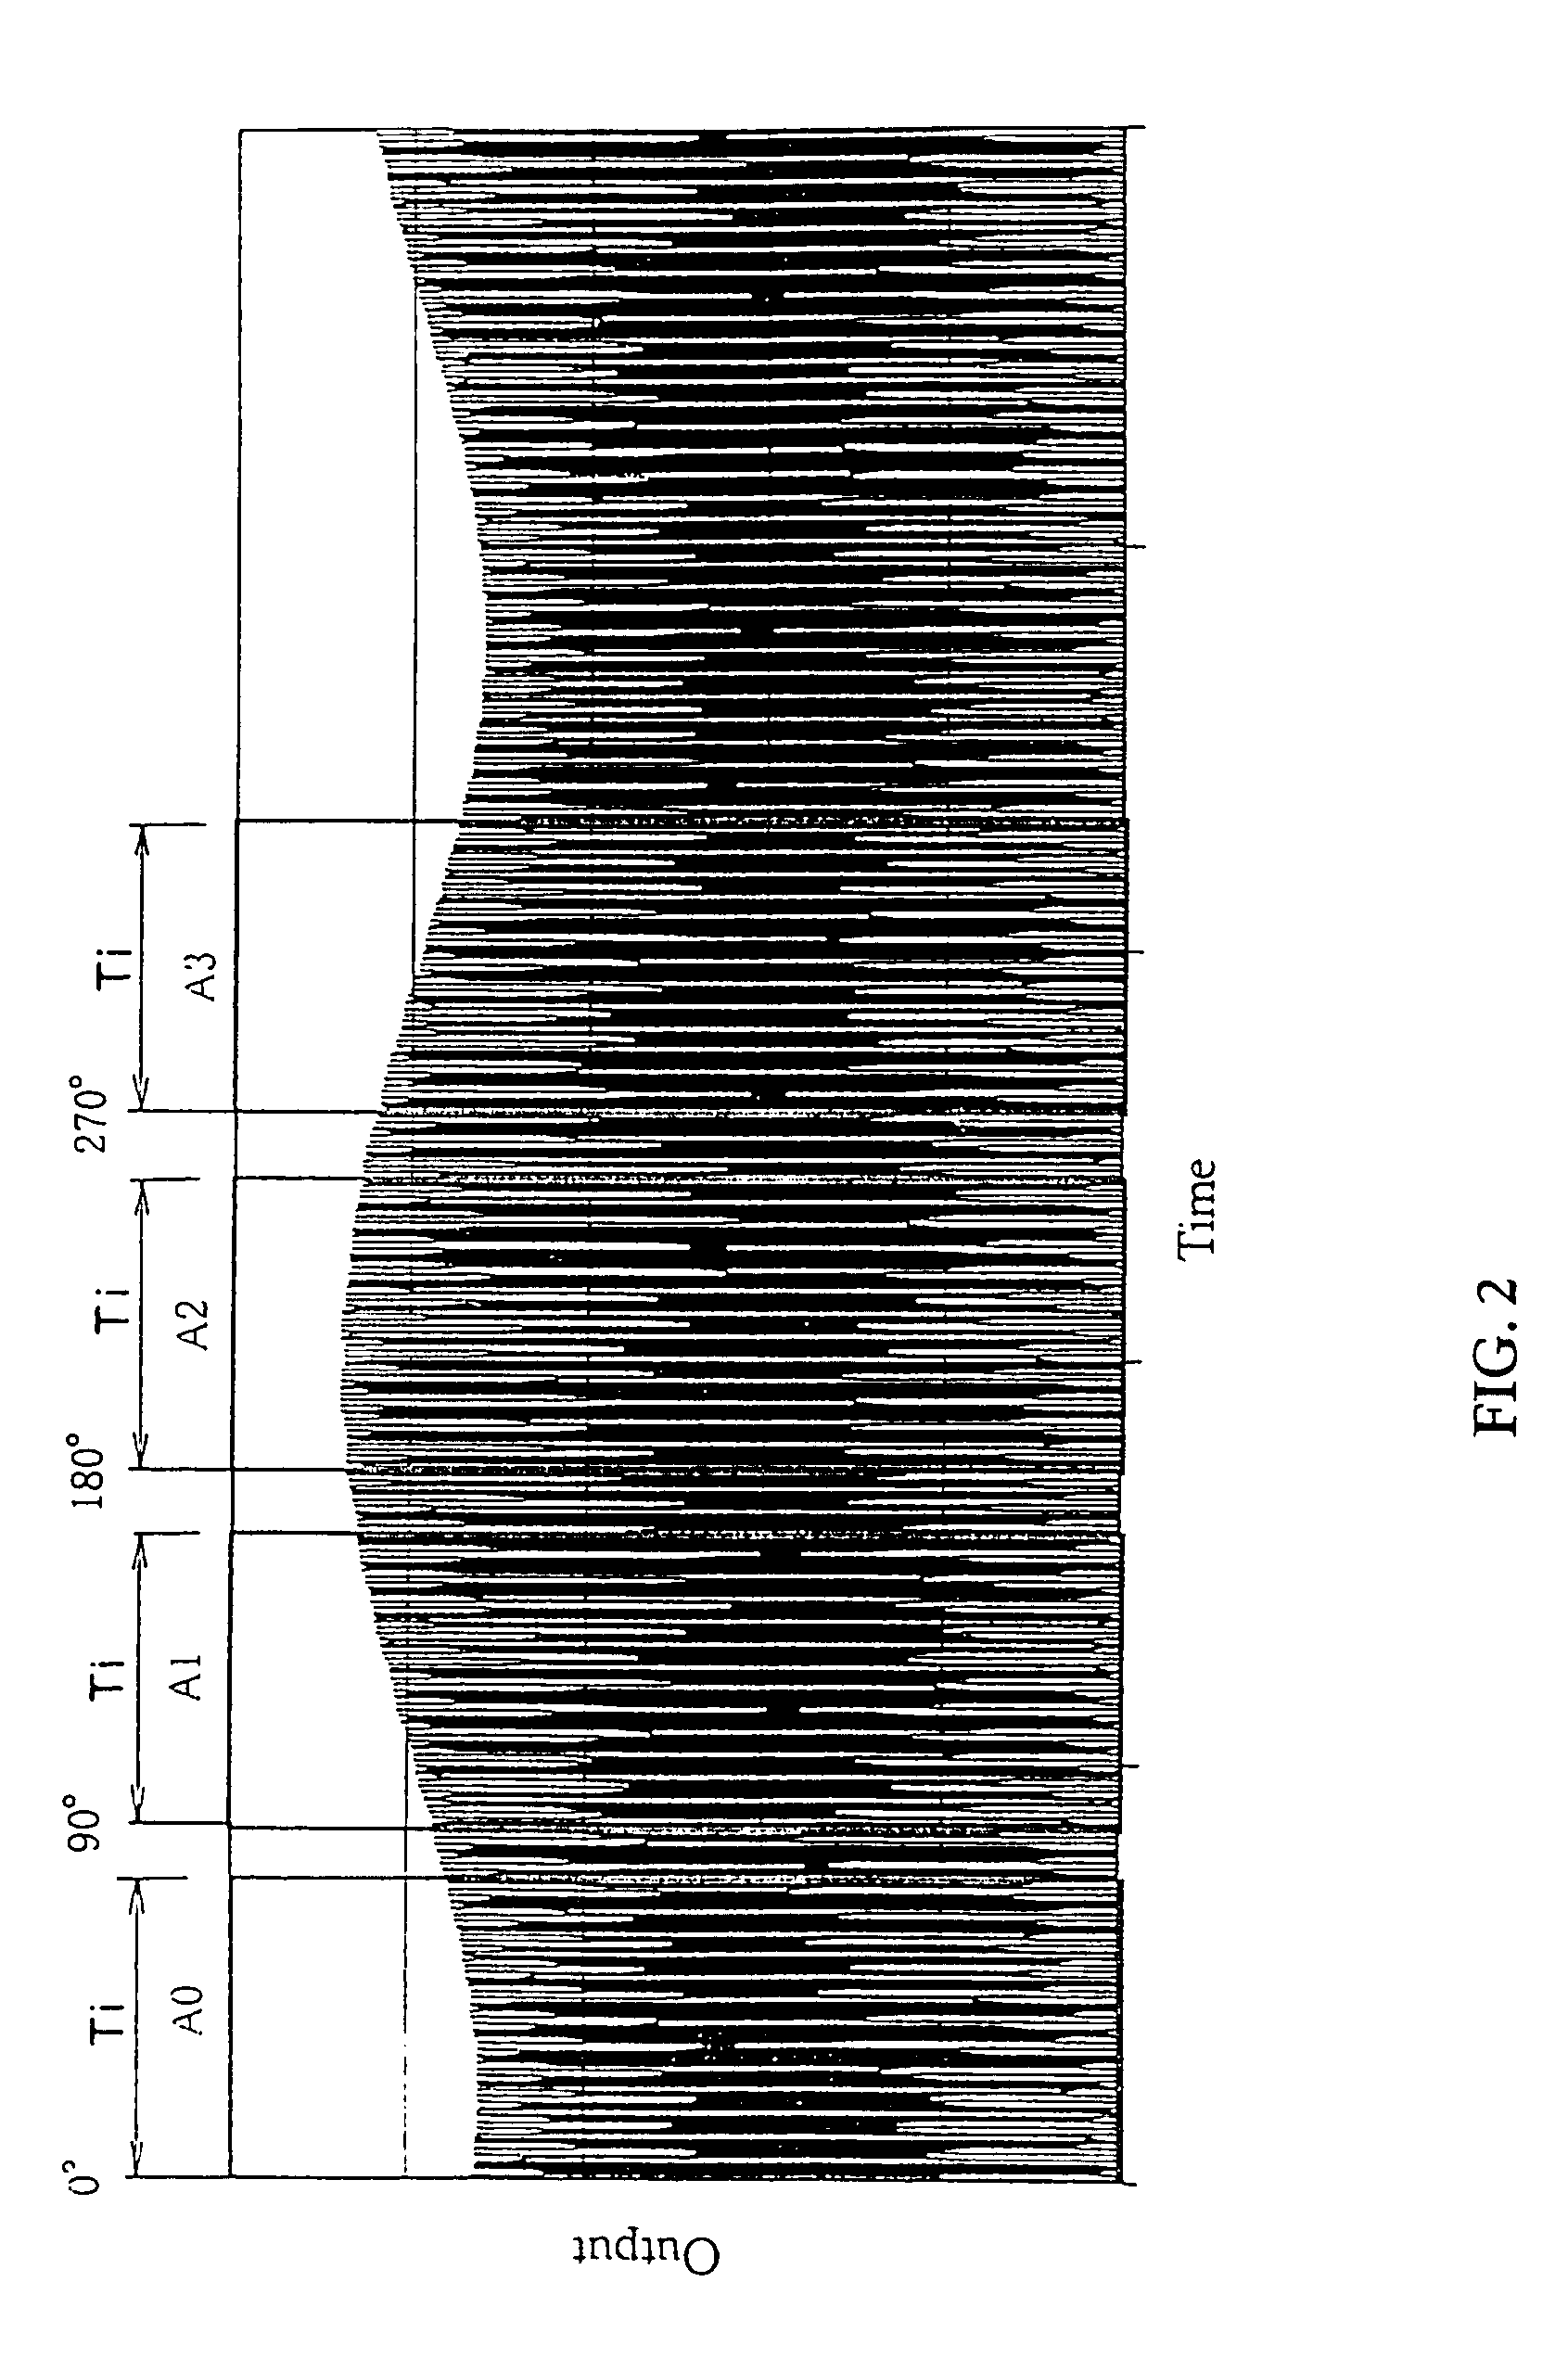 Spatial information detecting device using intensity-modulated light and a beat signal